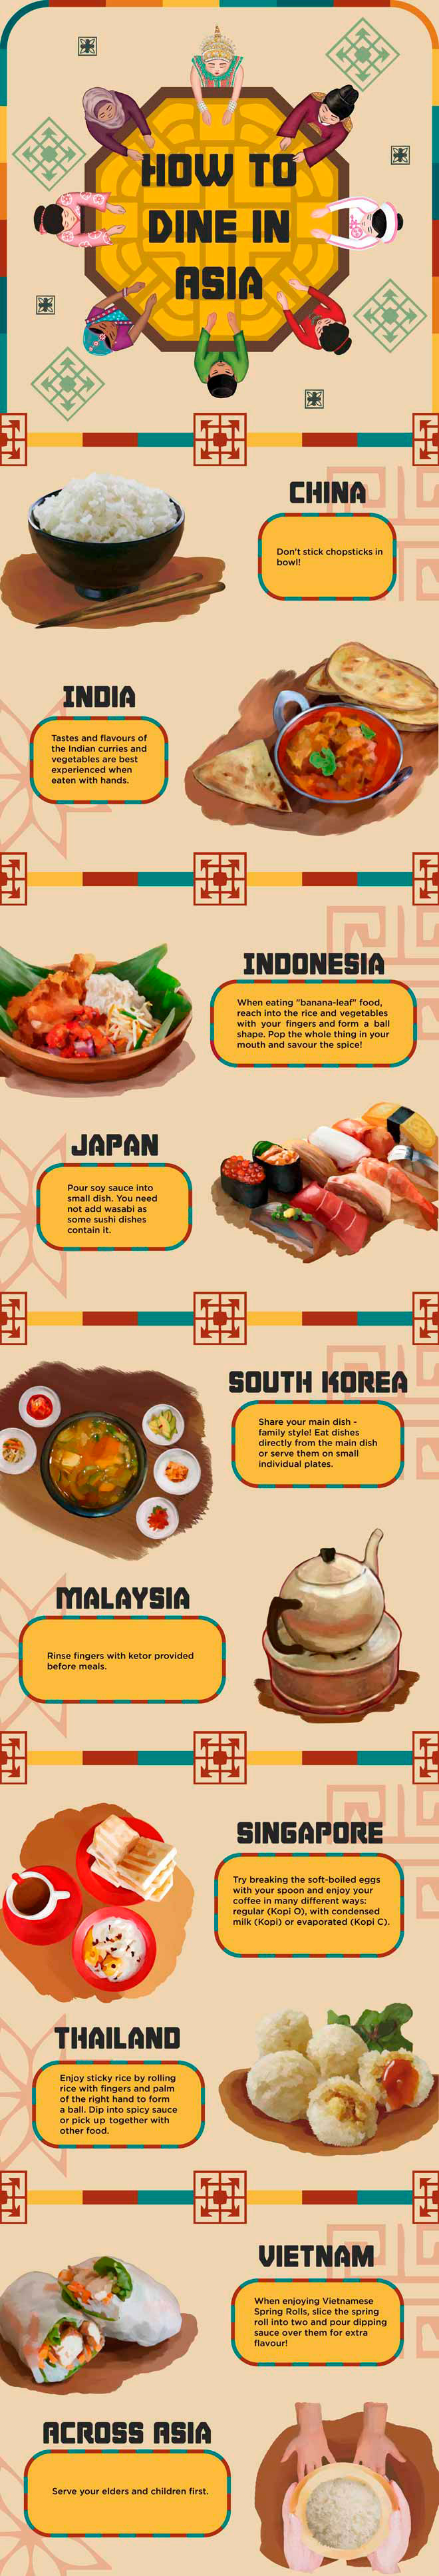 How to Dine in Asia